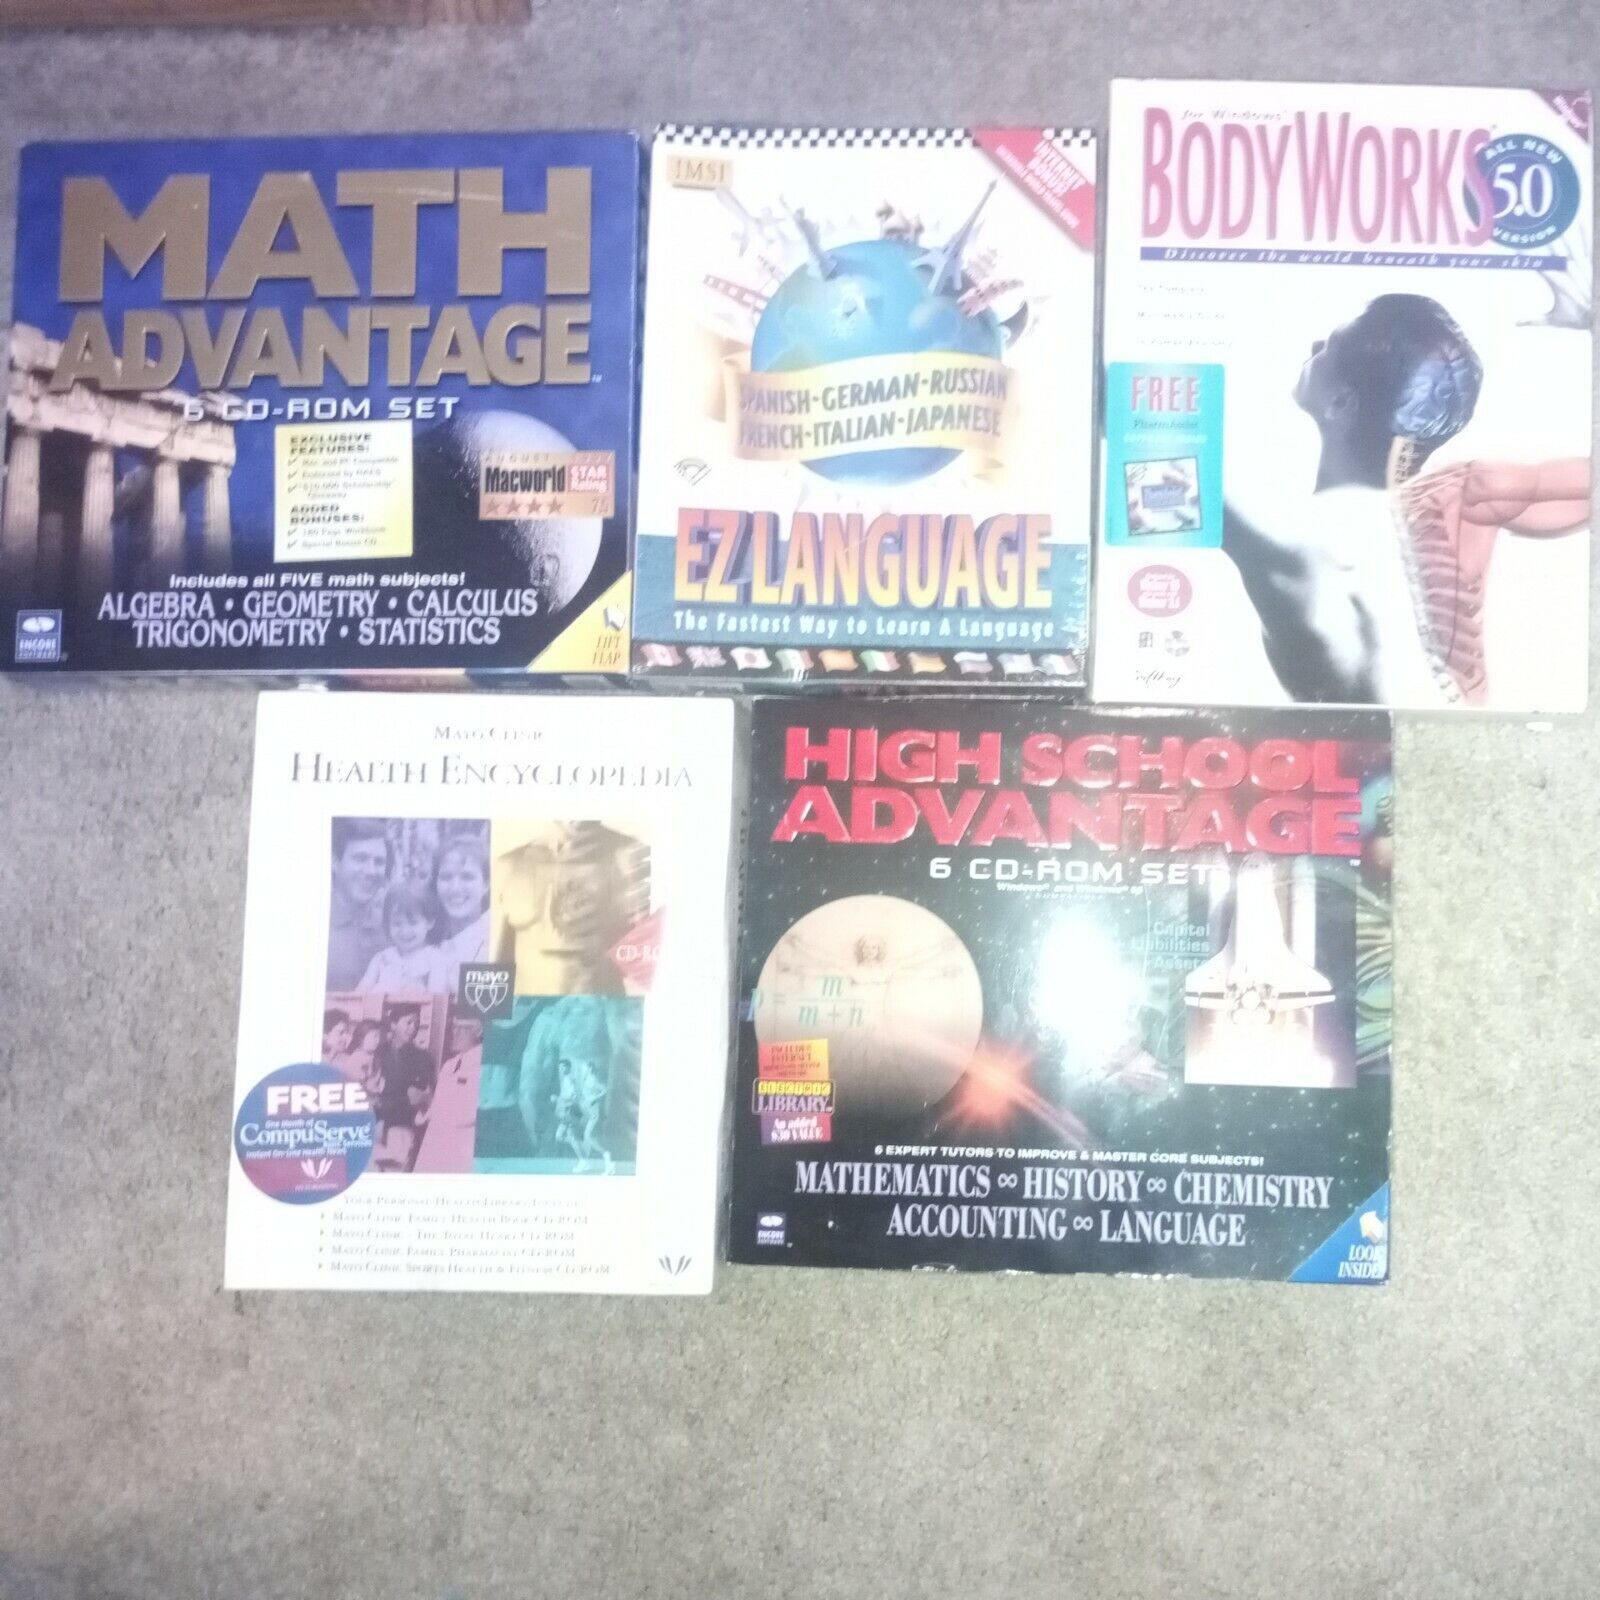 Wholesale Lot Of 5 New Unopened Vintage Cd Rom Sets Collectable 1995 Math school